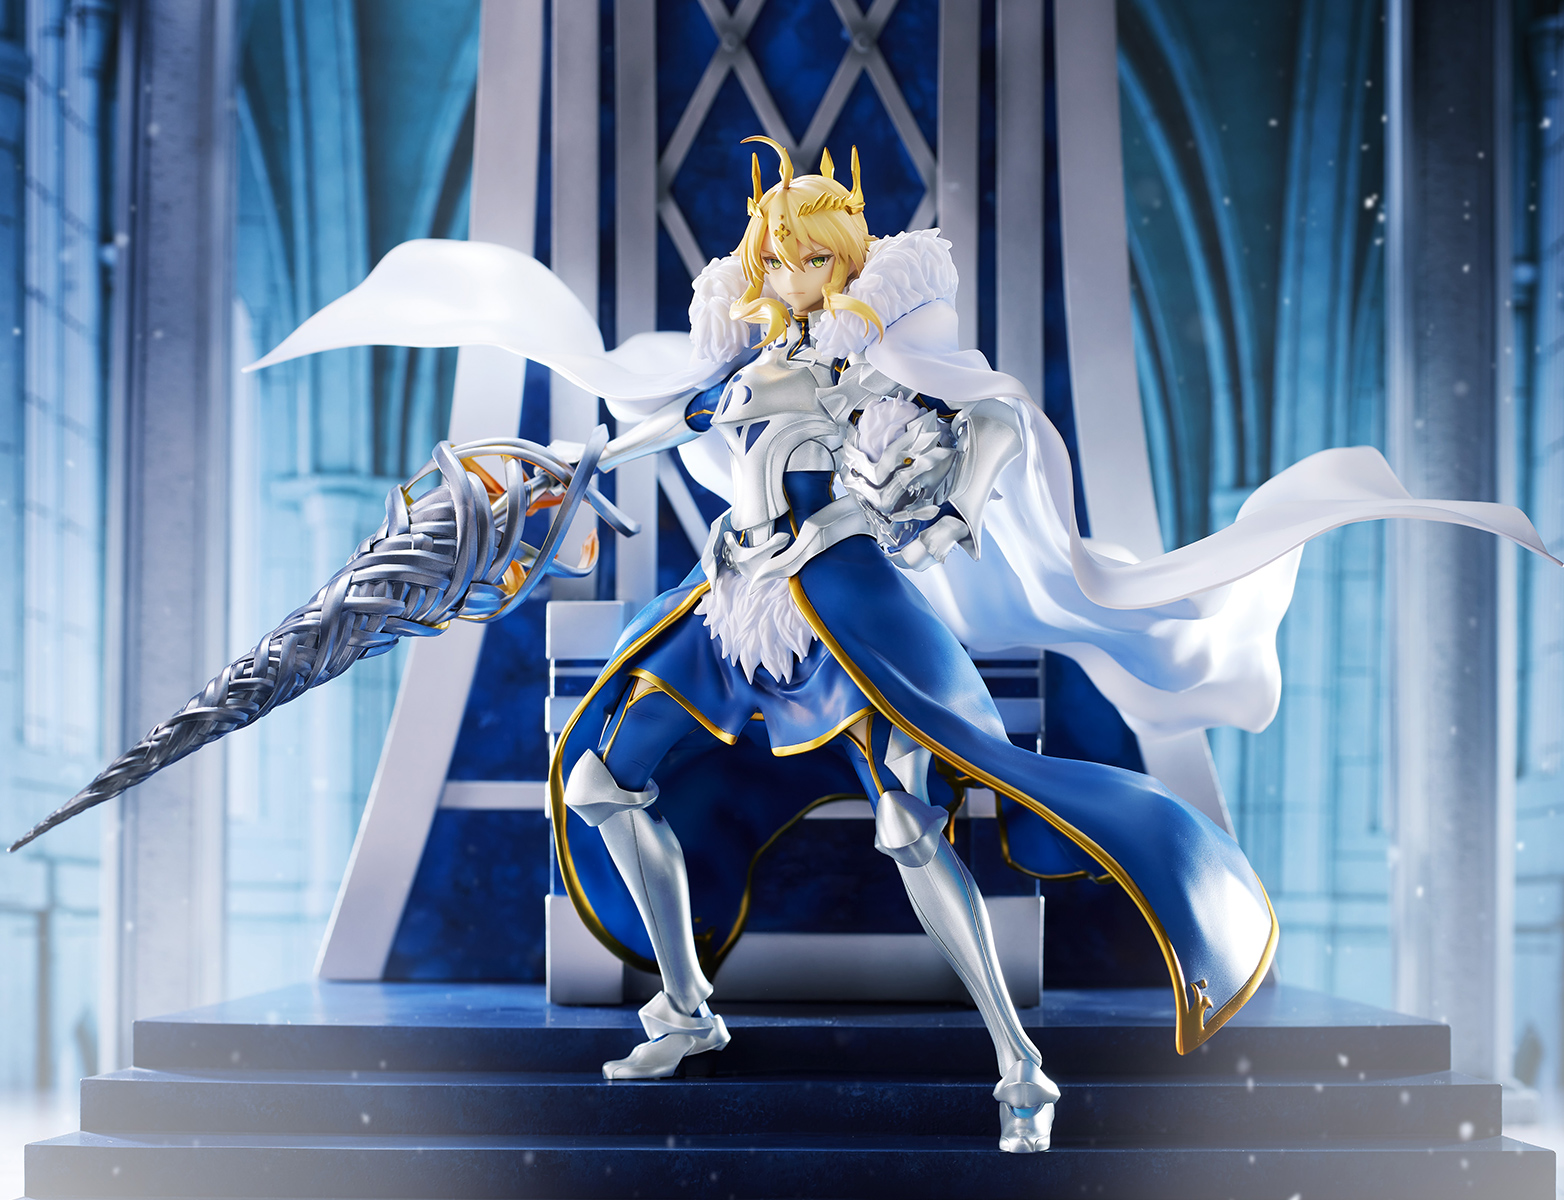 Lion King the movie "The Fate/Grand Order -Divine Realm of the Round Table: Camelot-" | High quality luxury brand Shibuya Scramble Figure